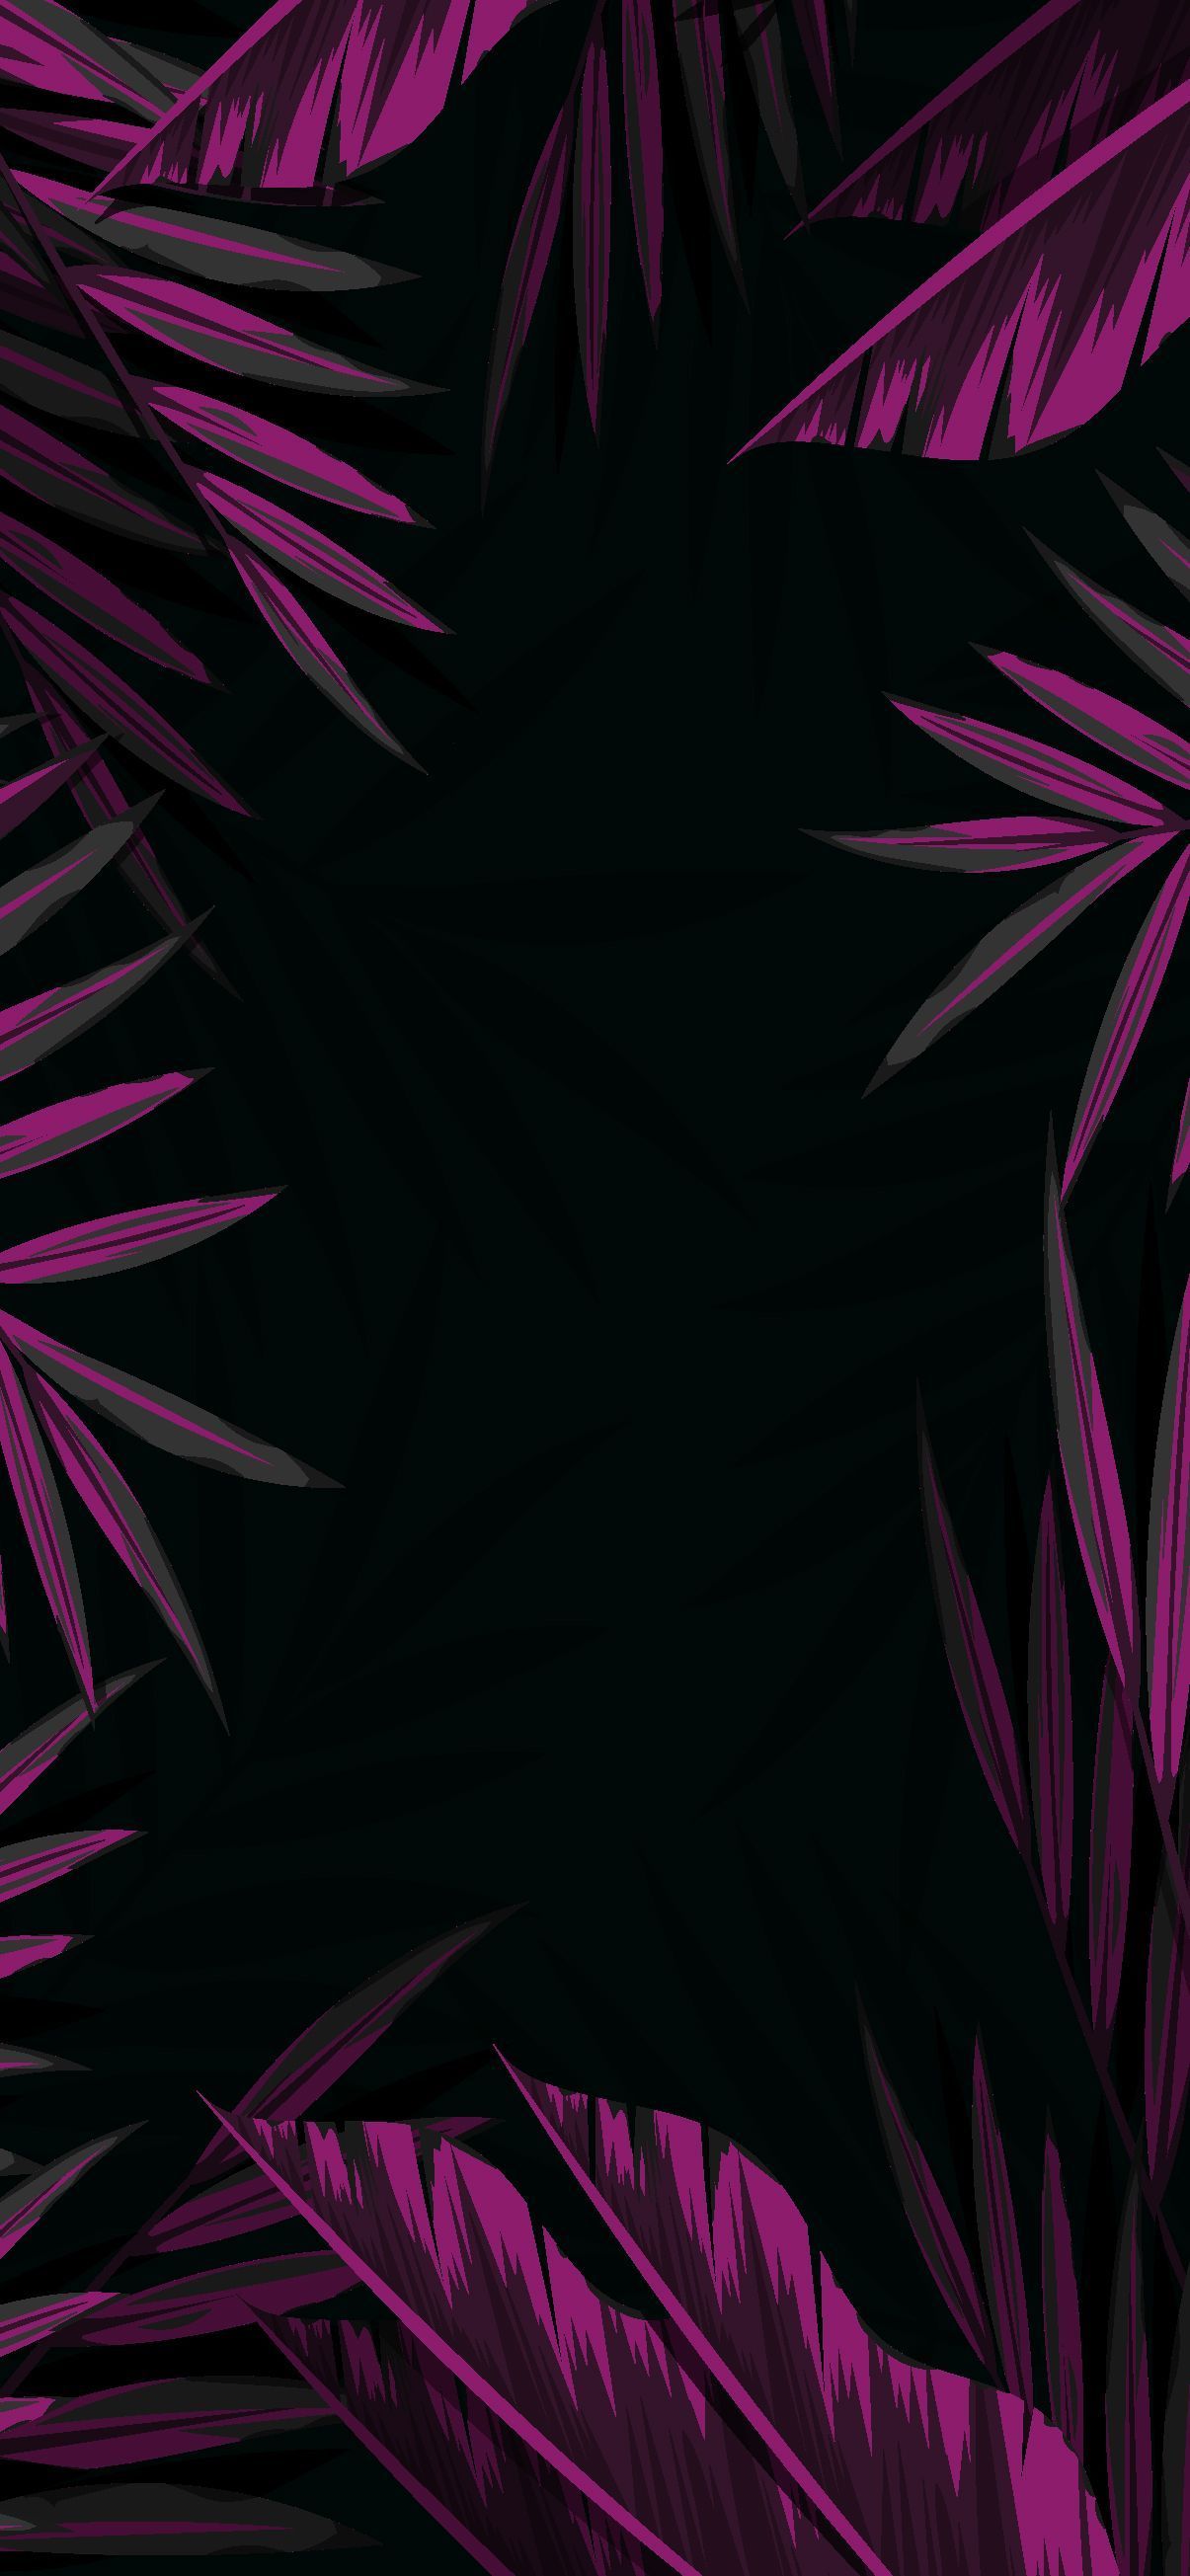 A purple and black background with palm leaves - Phone, dark phone